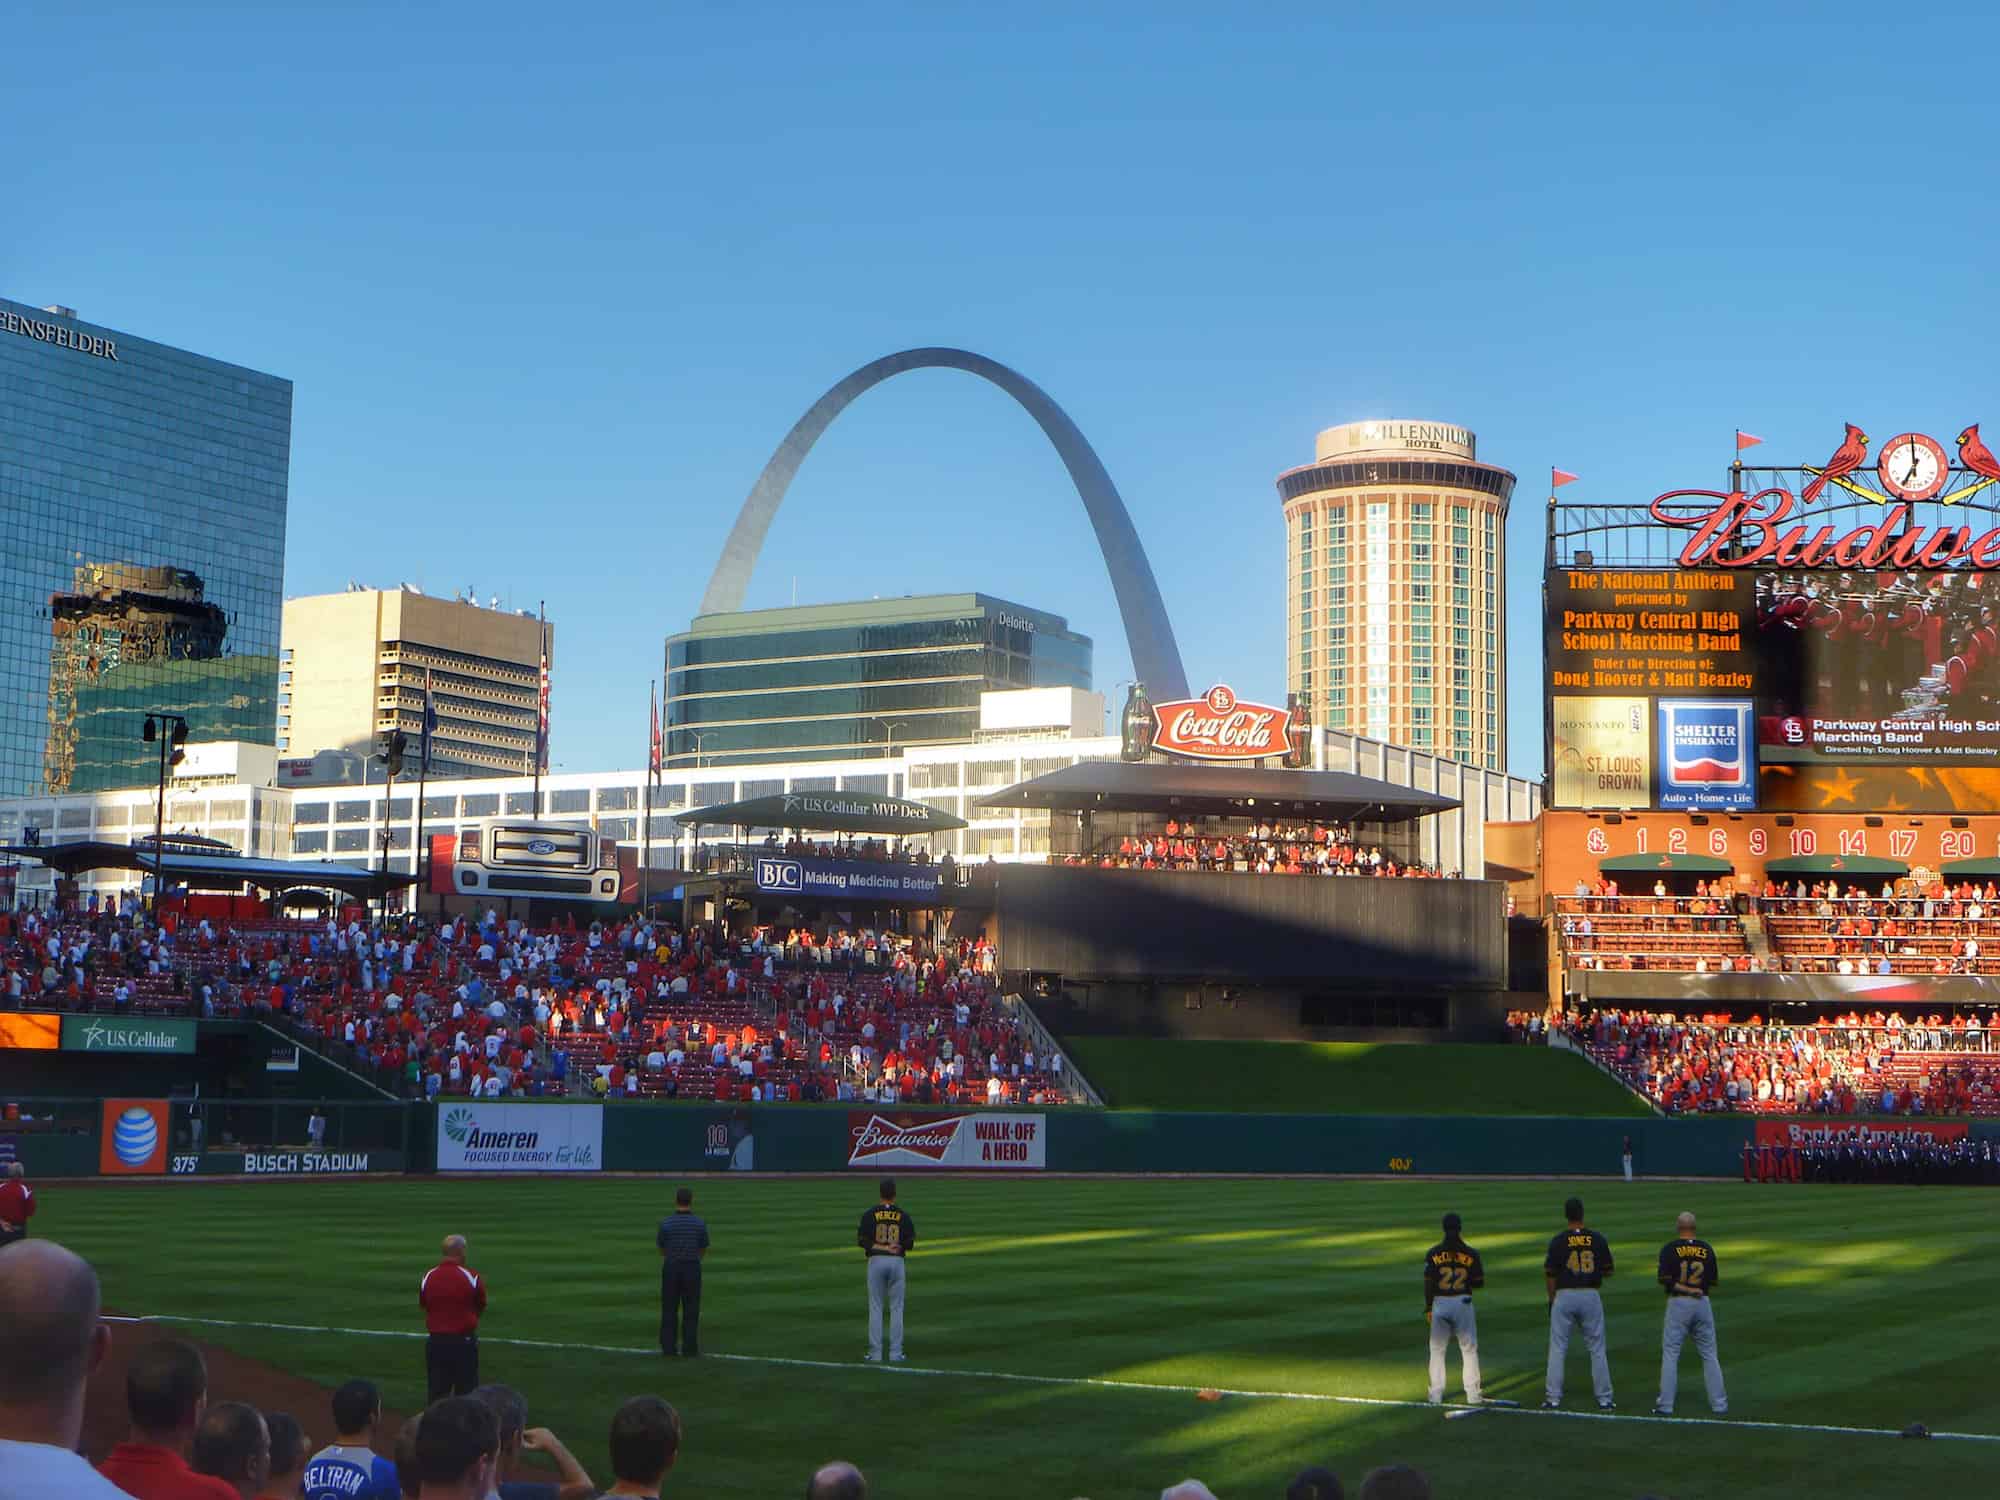 Arch view from Cardinals stadium